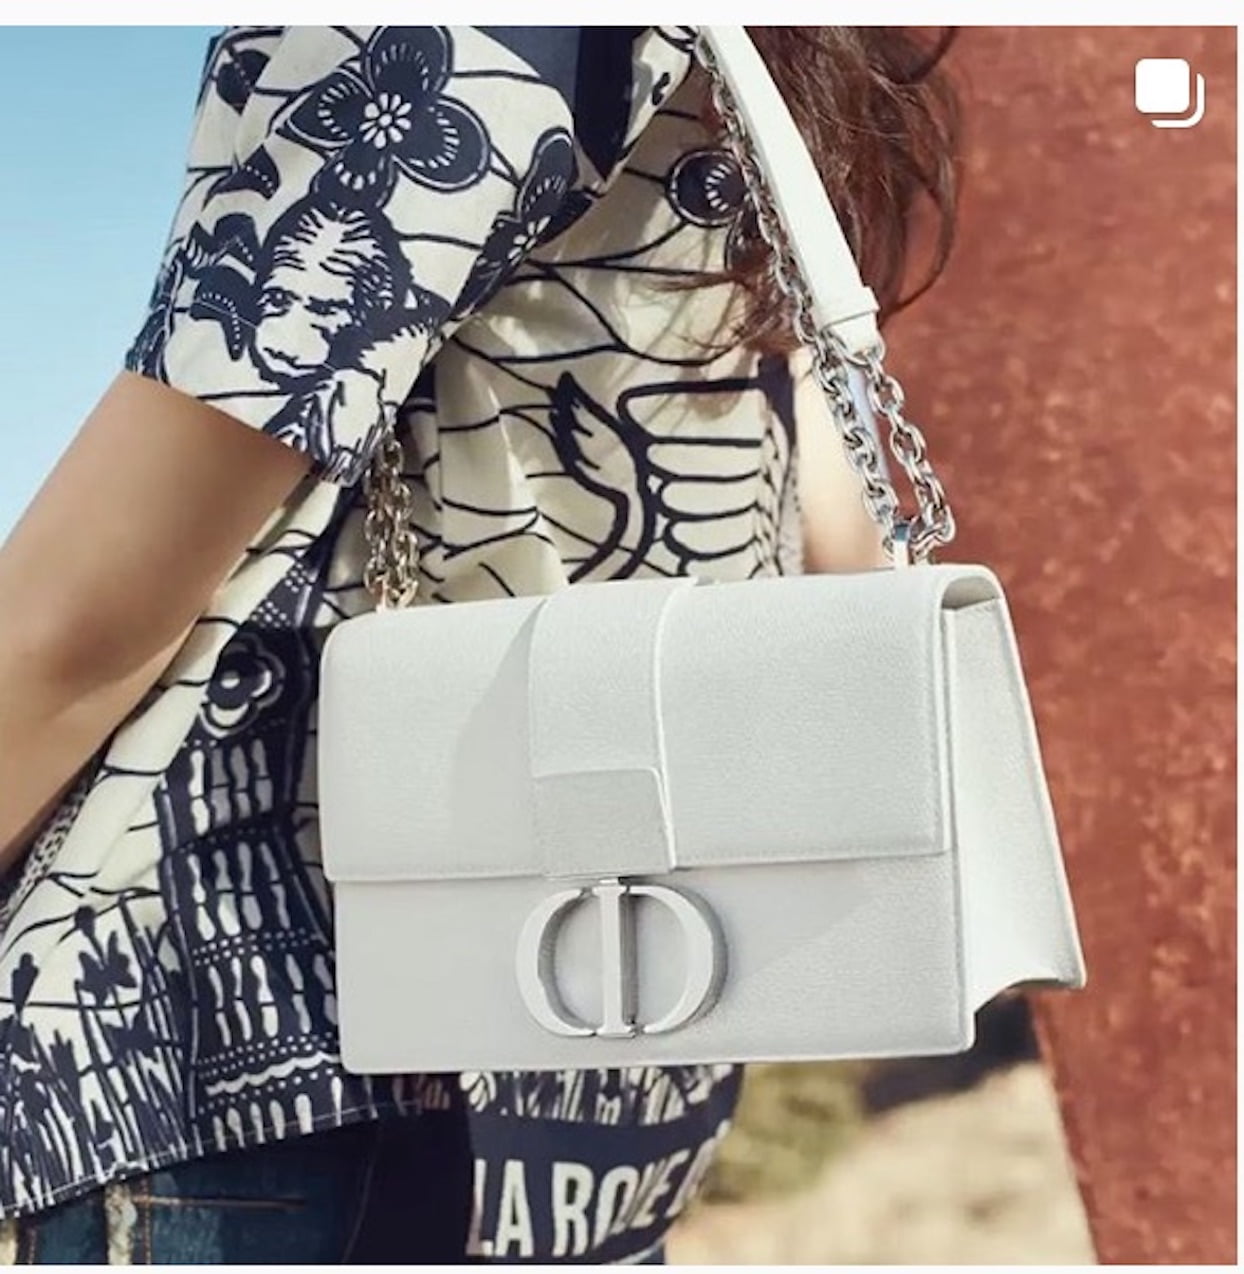 dior new bag collection 2019